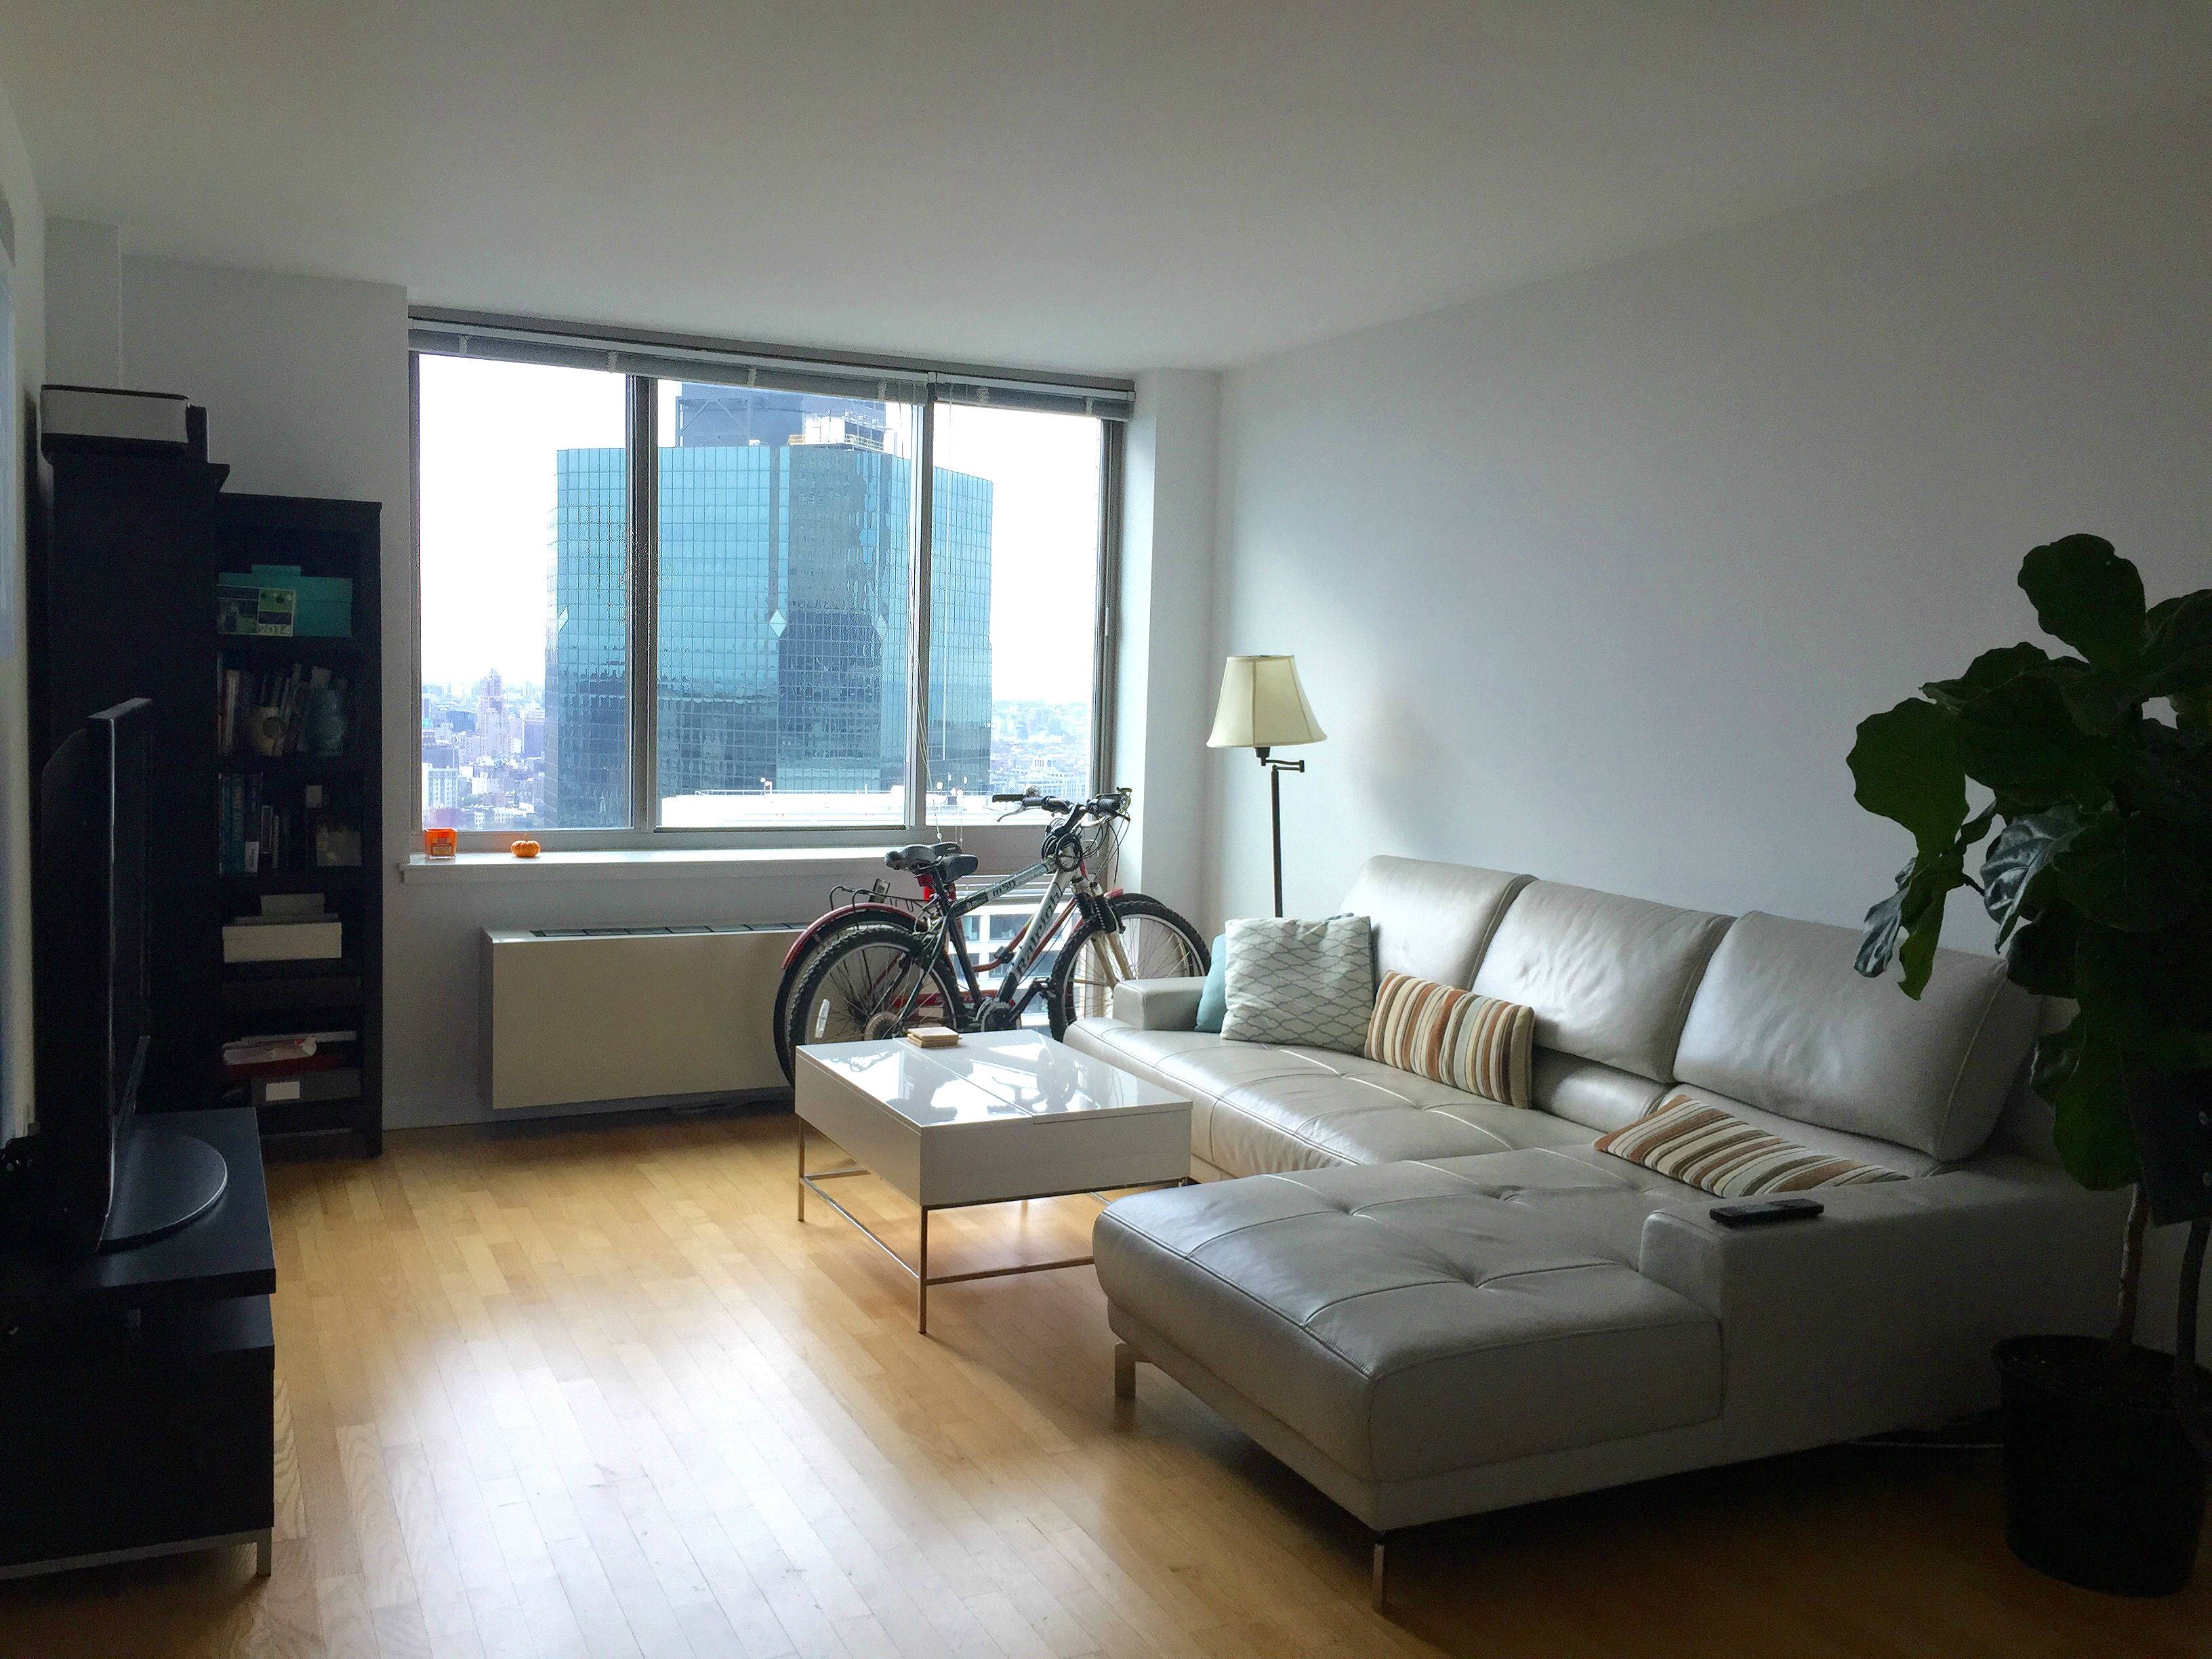 Financial District Luxury high-rise 1BD - 50th Floor Views of the East River & Brooklyn Bridge, Swimming Pool & other luxury amenities. 